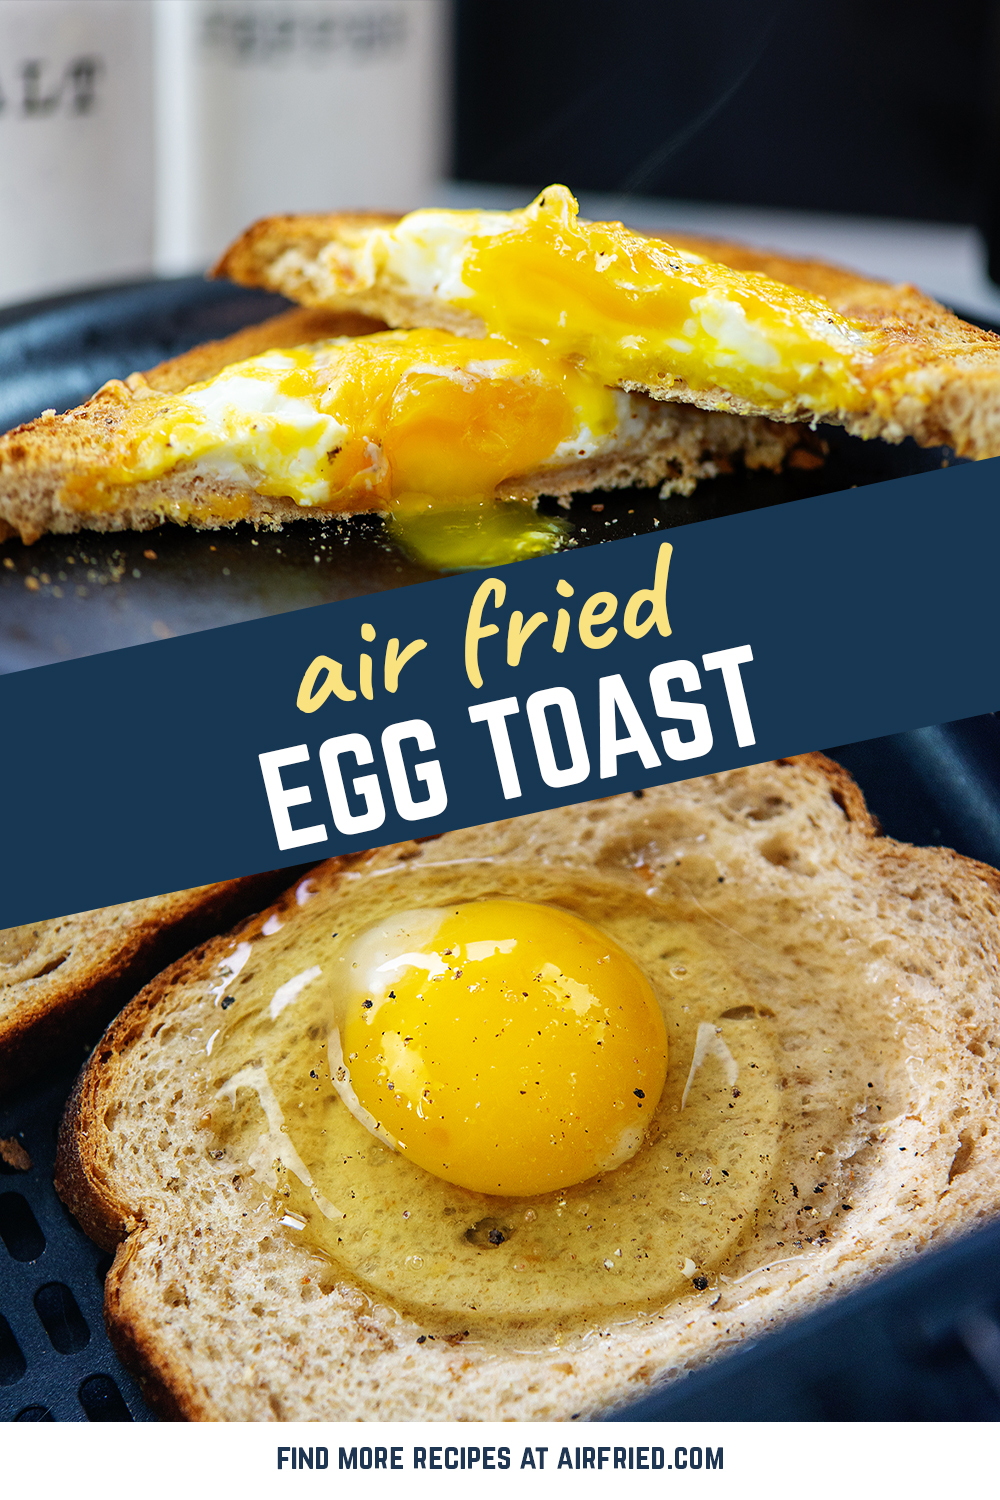 This AIR FRYER EGG TOAST will get breakfast on your table in less than 10 minutes! A delicious runny yolk and a slice of toast to soak it up - all cooked at once in the air fryer. 